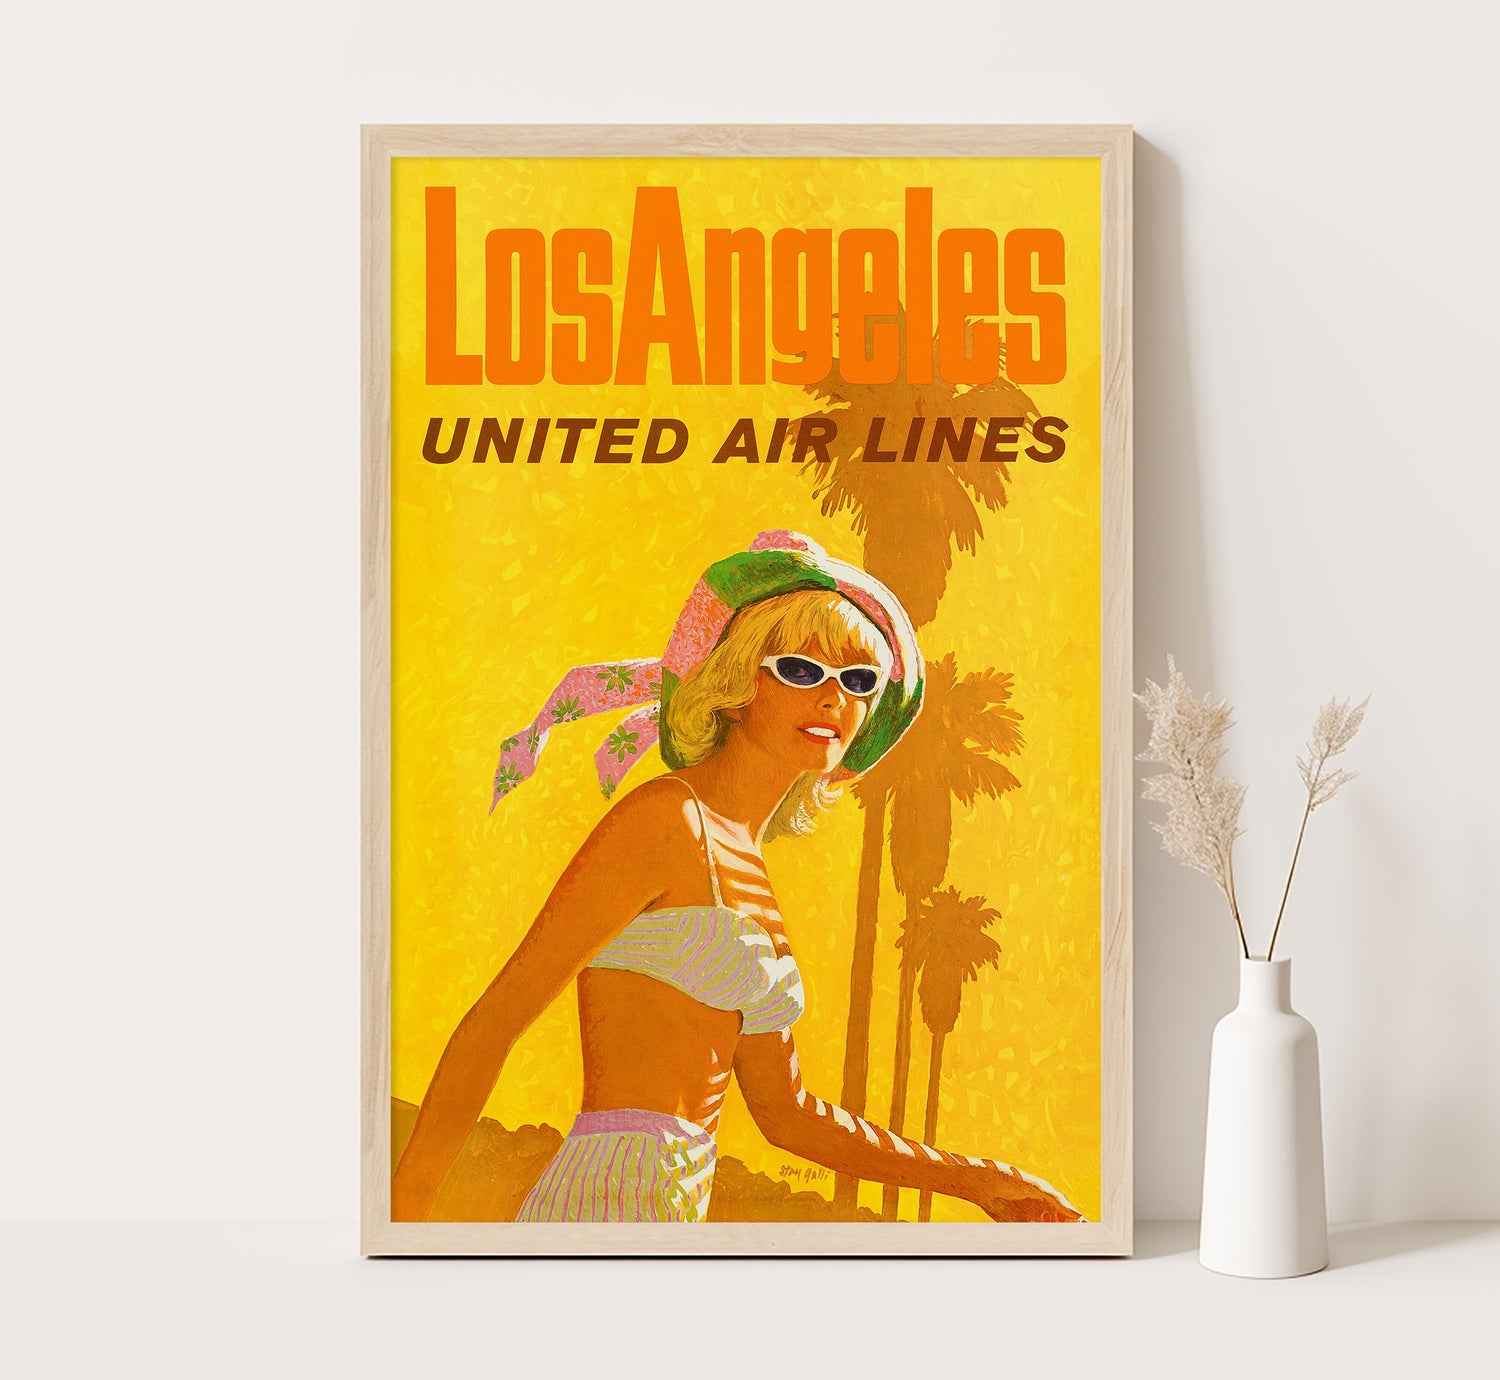 USA travel posters